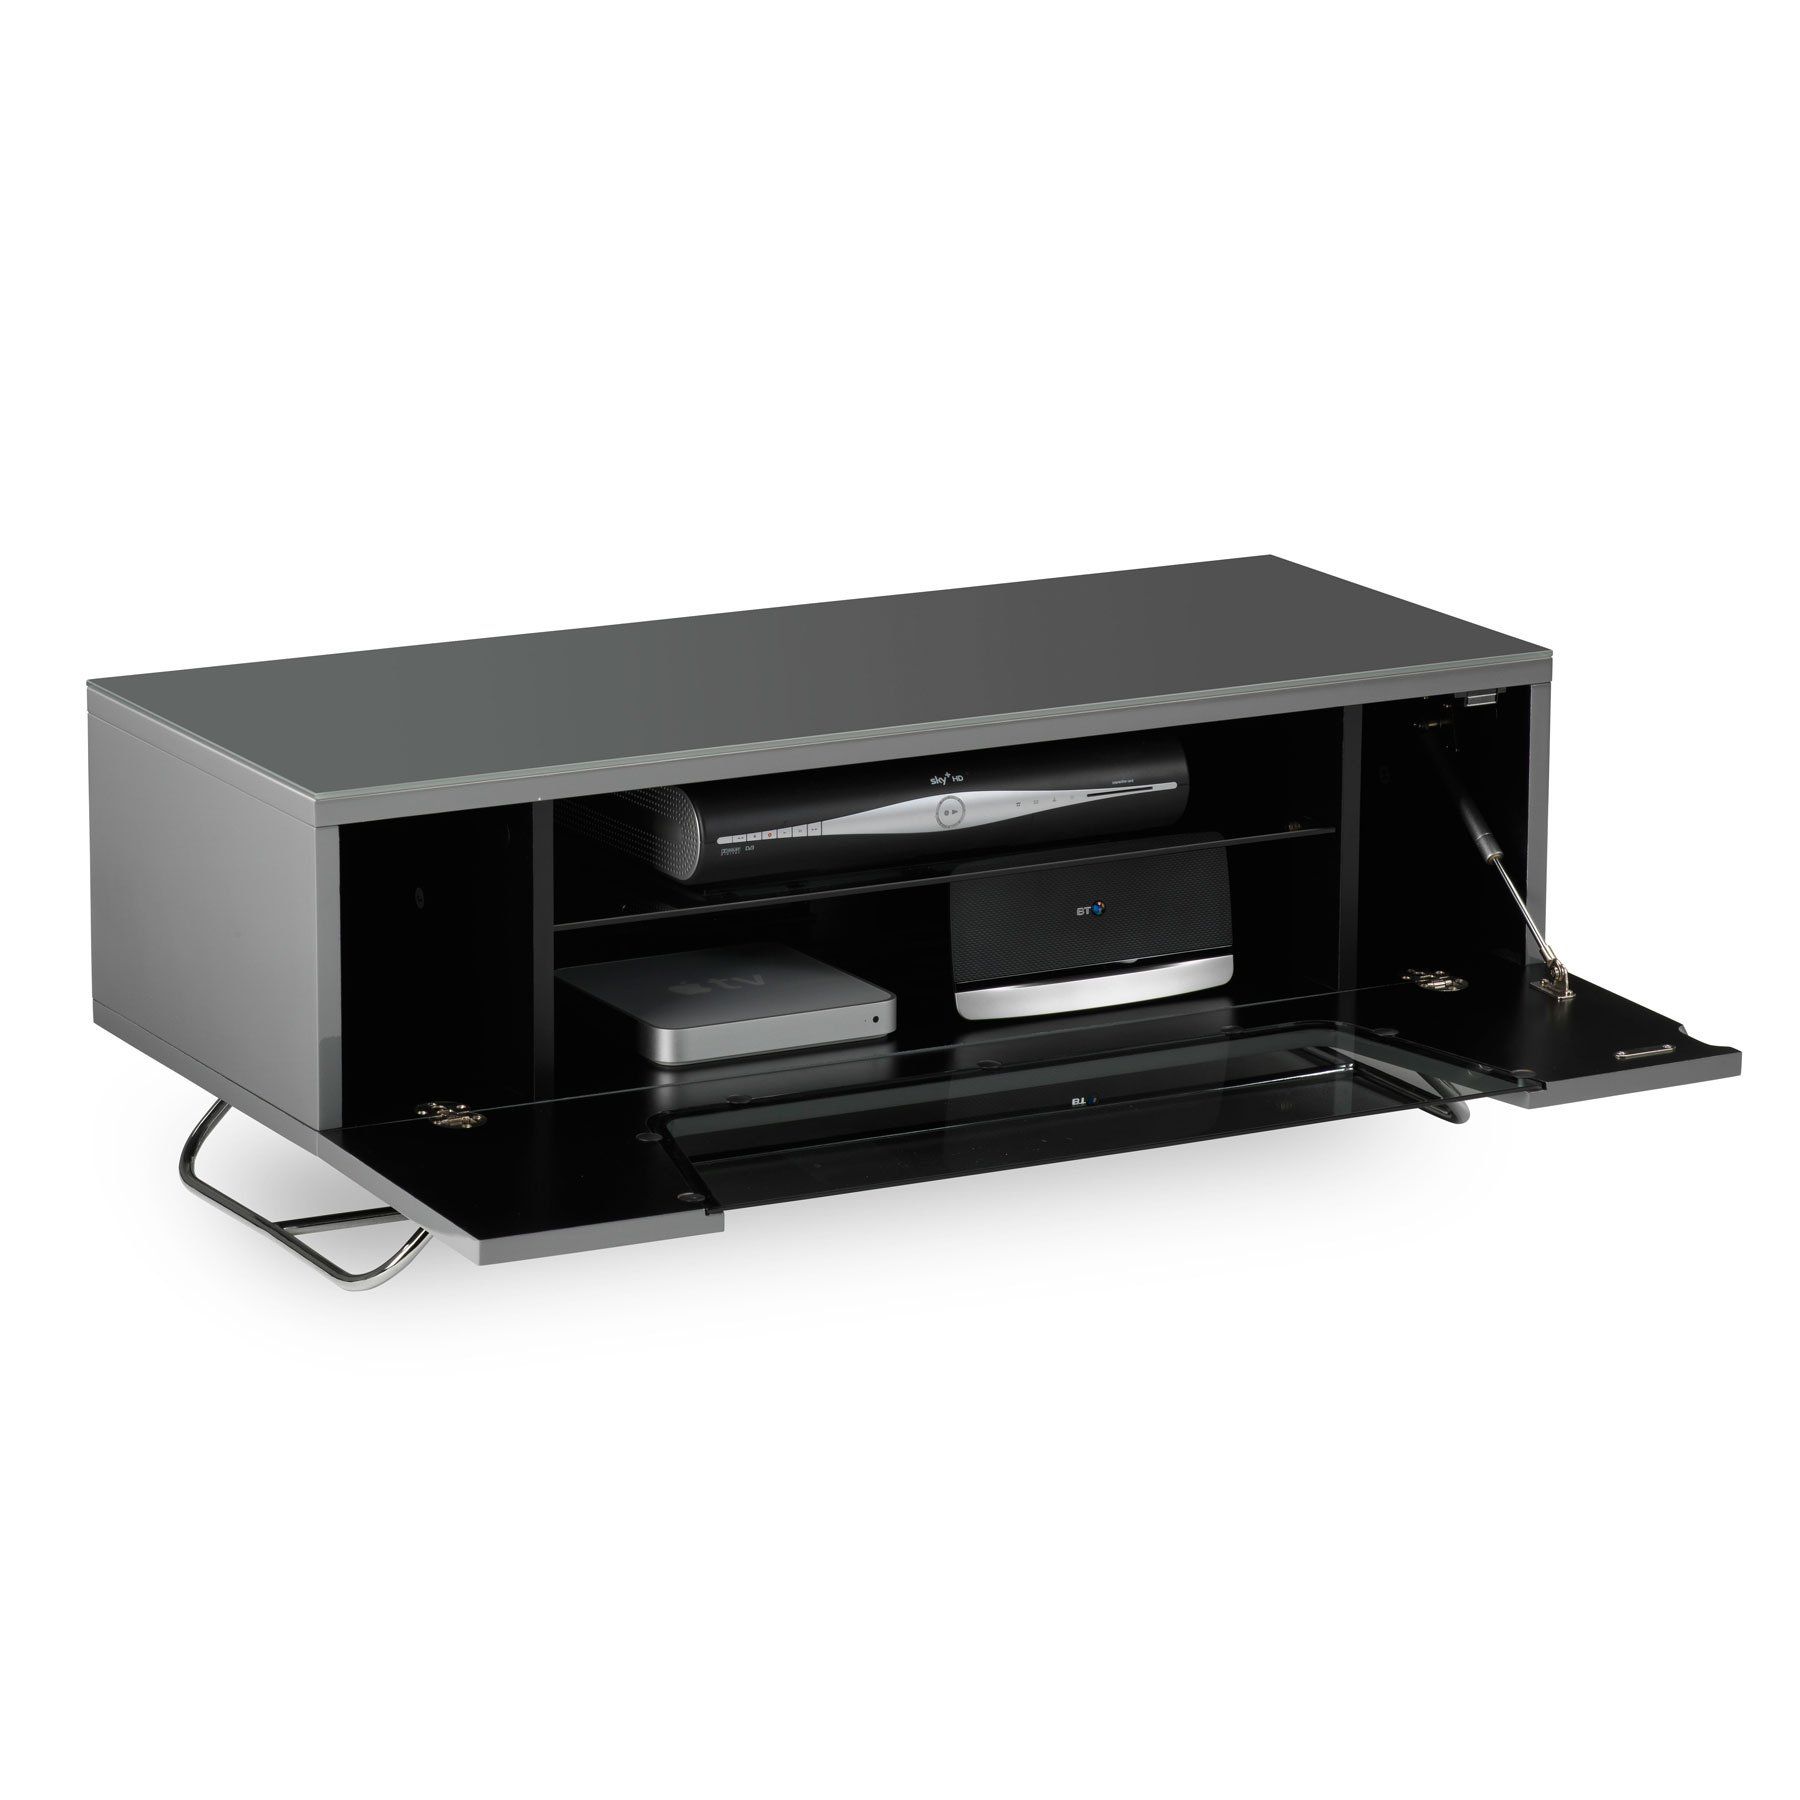 Alphason Chromium 2 100cm Grey Tv Stand For Up To 50" Tvs Throughout Tv Stand 100cm (View 3 of 15)